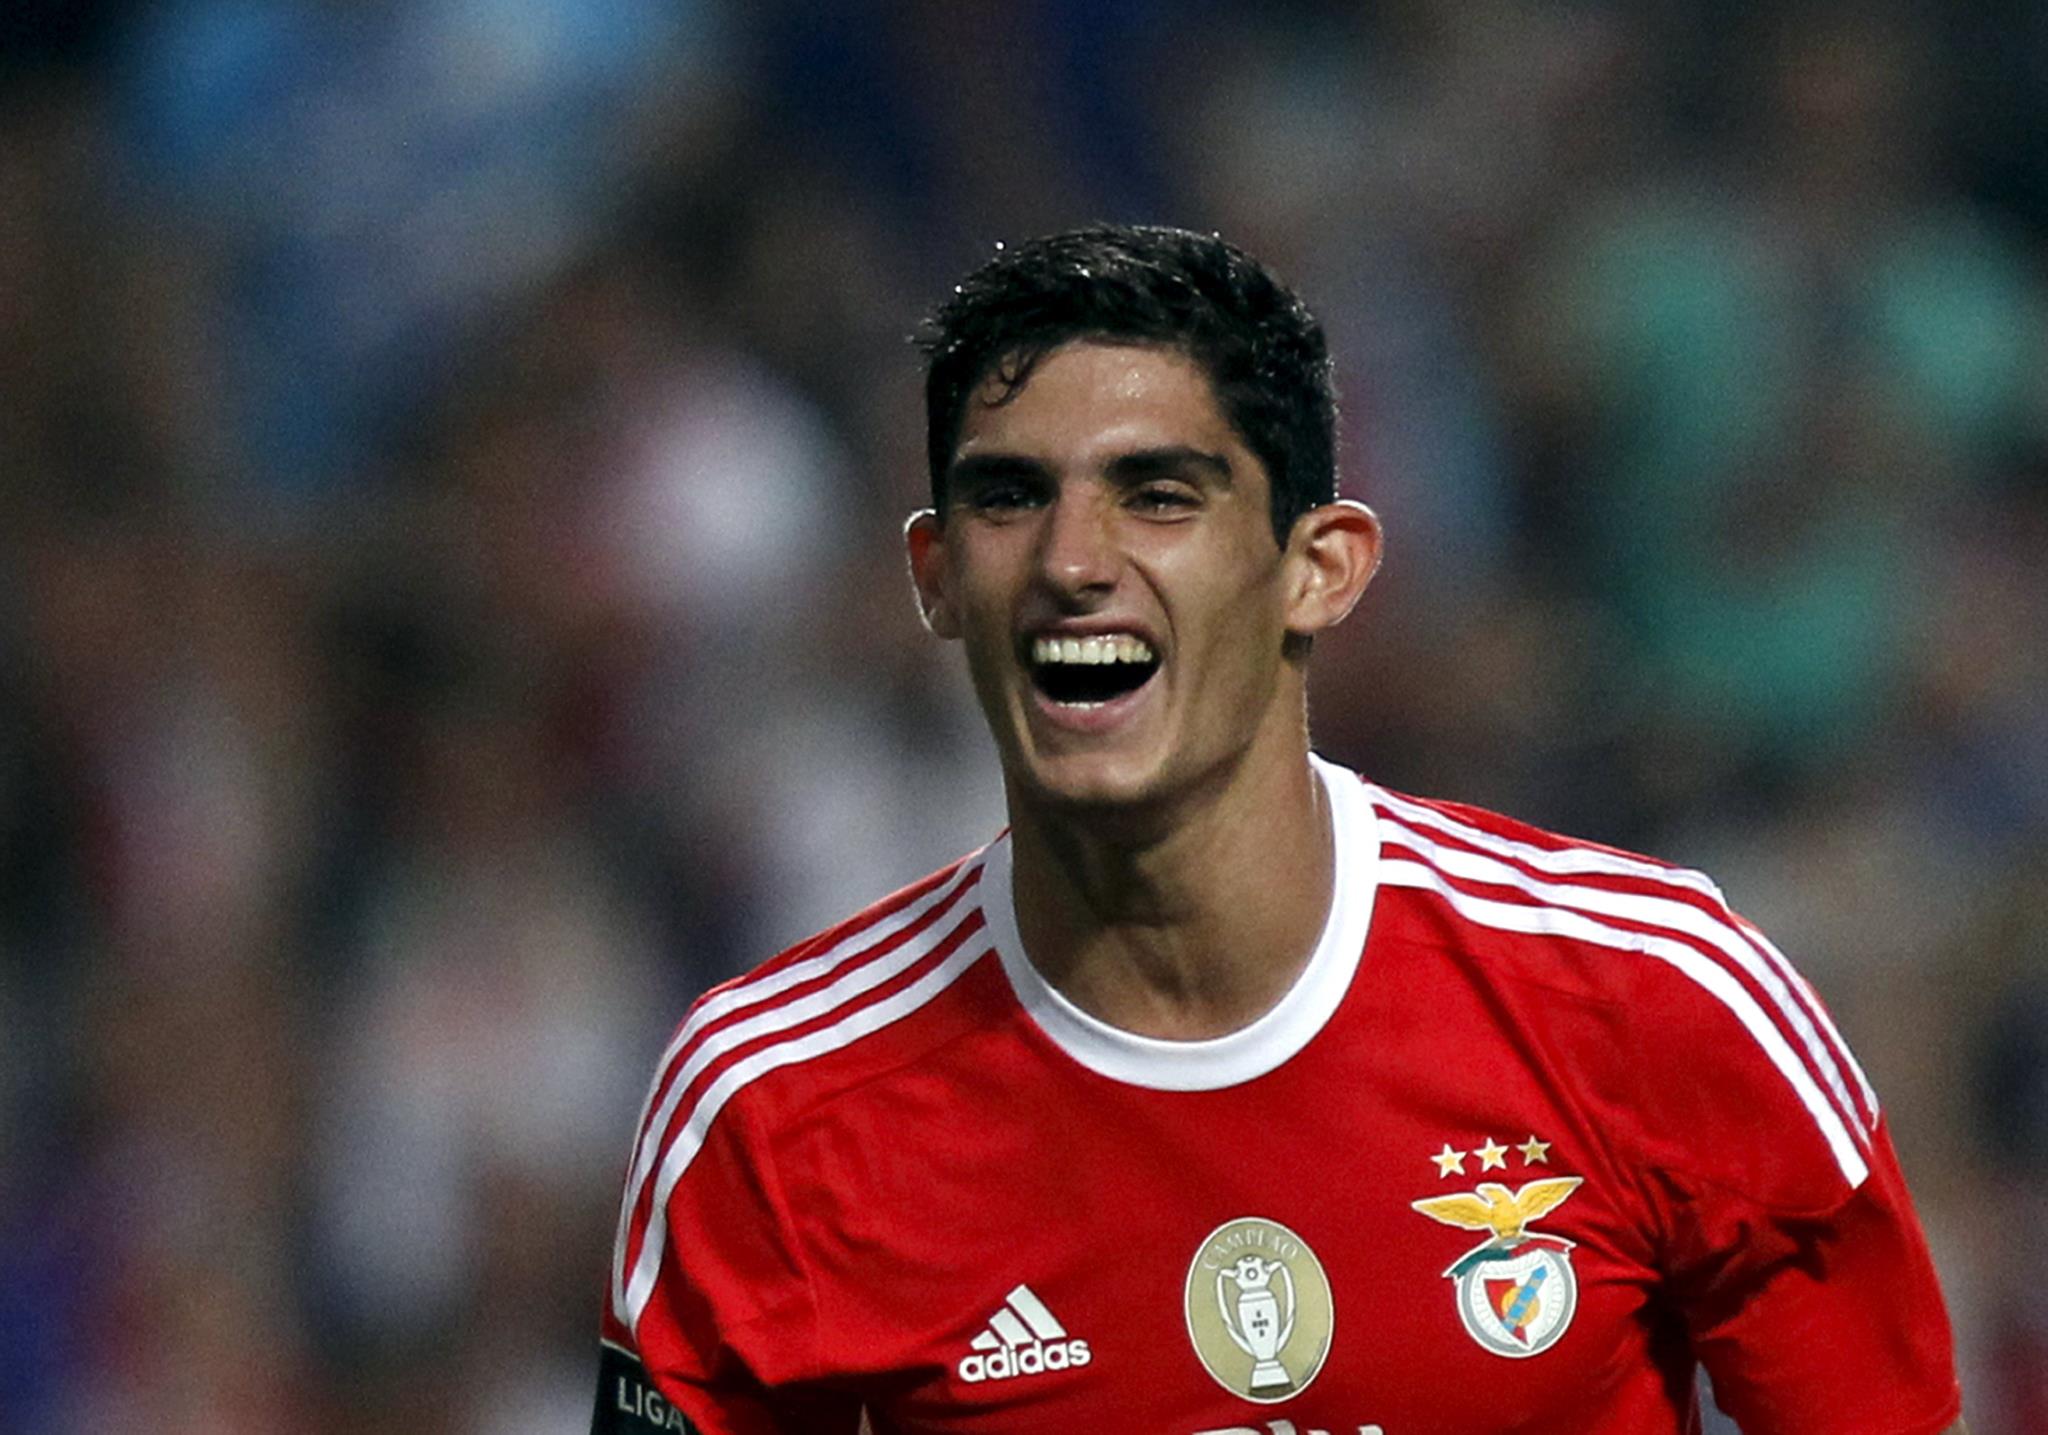 goncalo guedes - photo #19